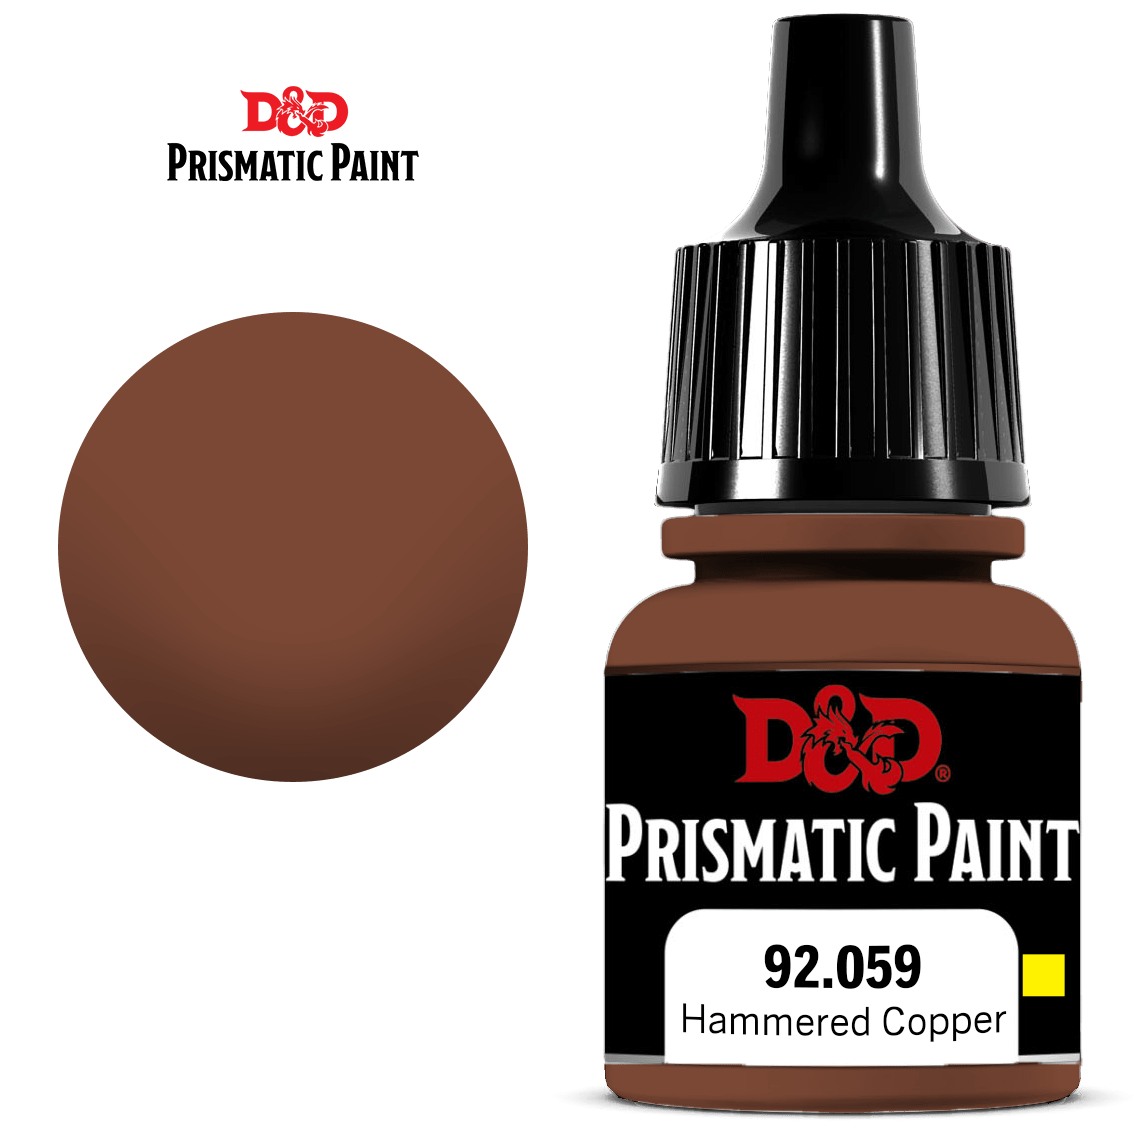 PRISMATIC PAINT: HAMMERED COPPER | BD Cosmos